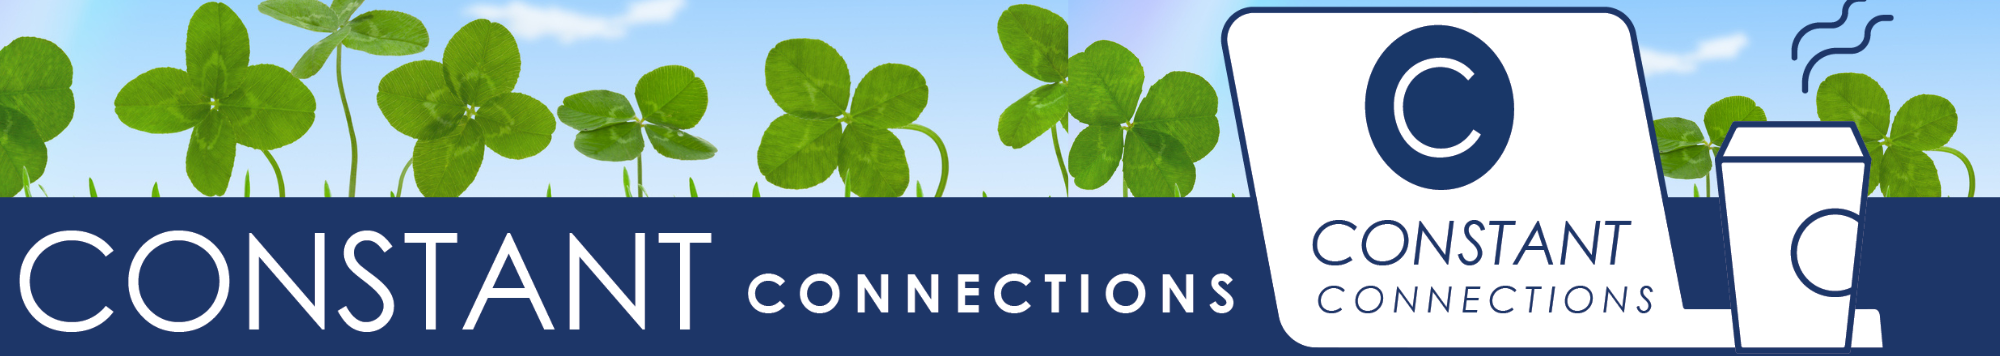 CONSTANT Connections header with four leaf clovers as background